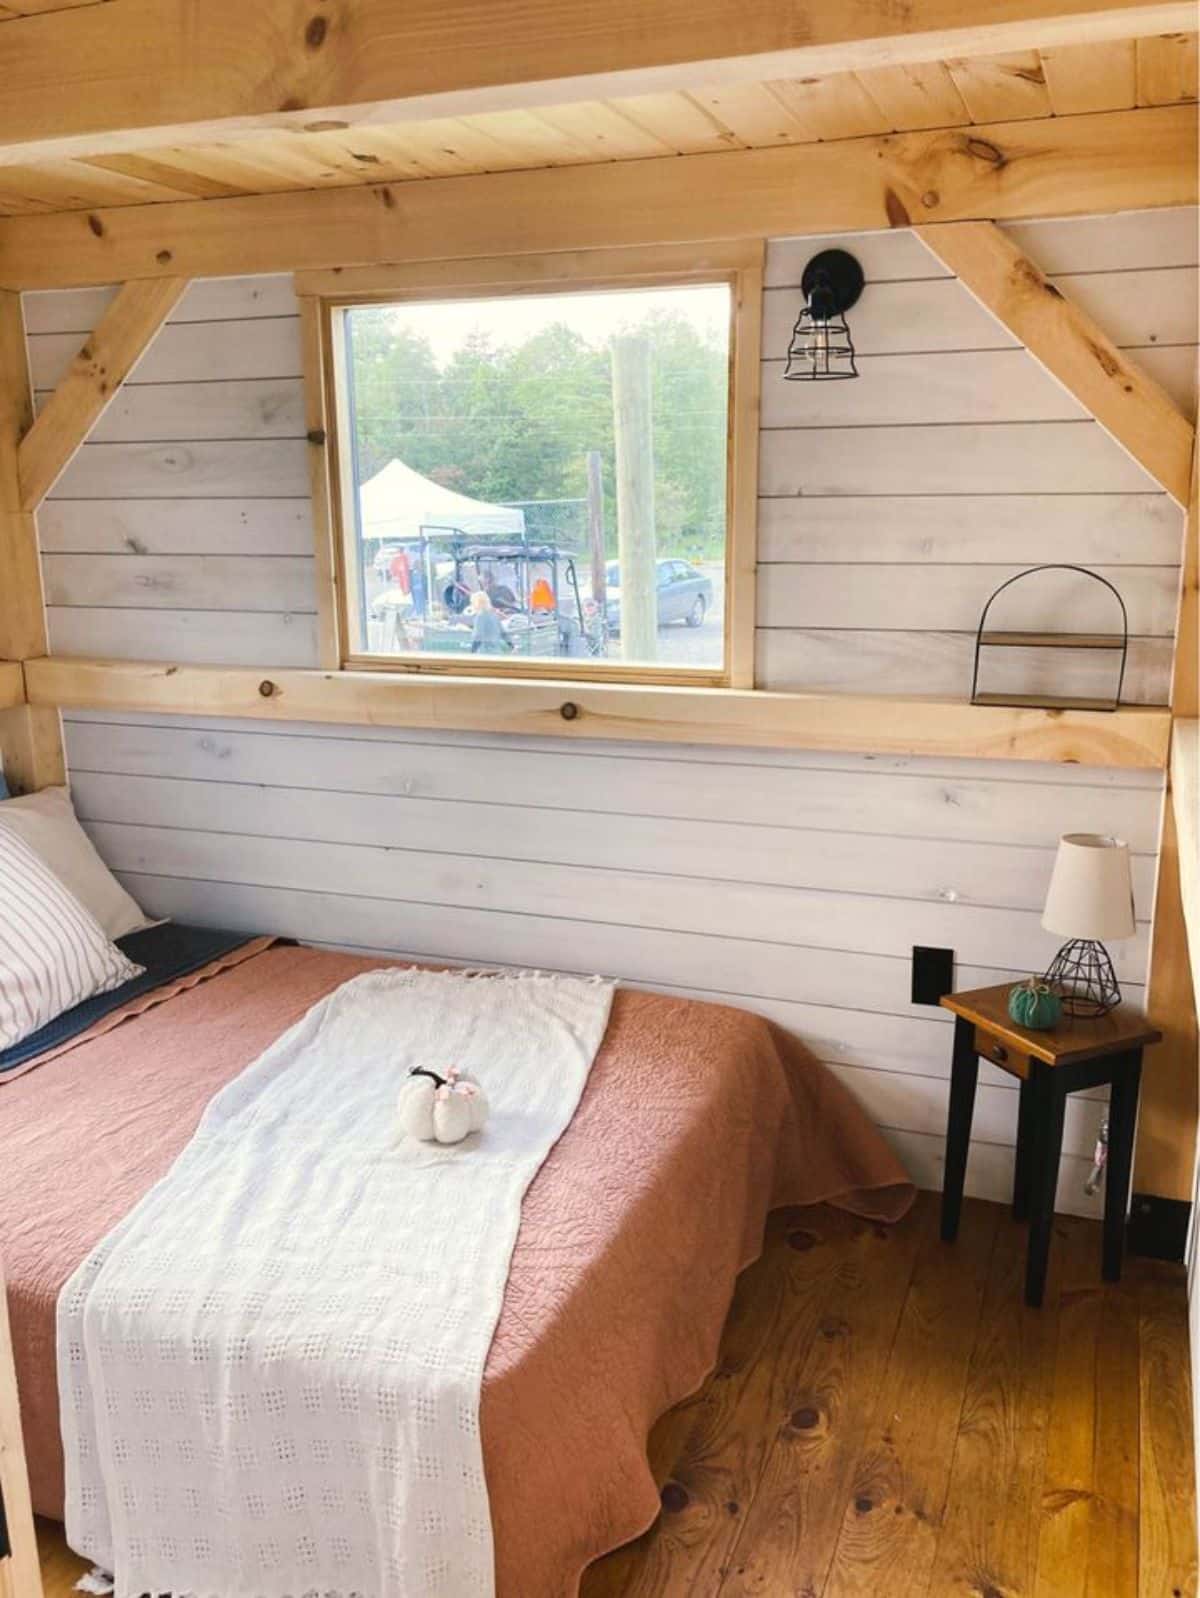 Main floor bedroom of 30' Delightful Tiny House has a bed, side table, lamp but can be converted to designated living area also